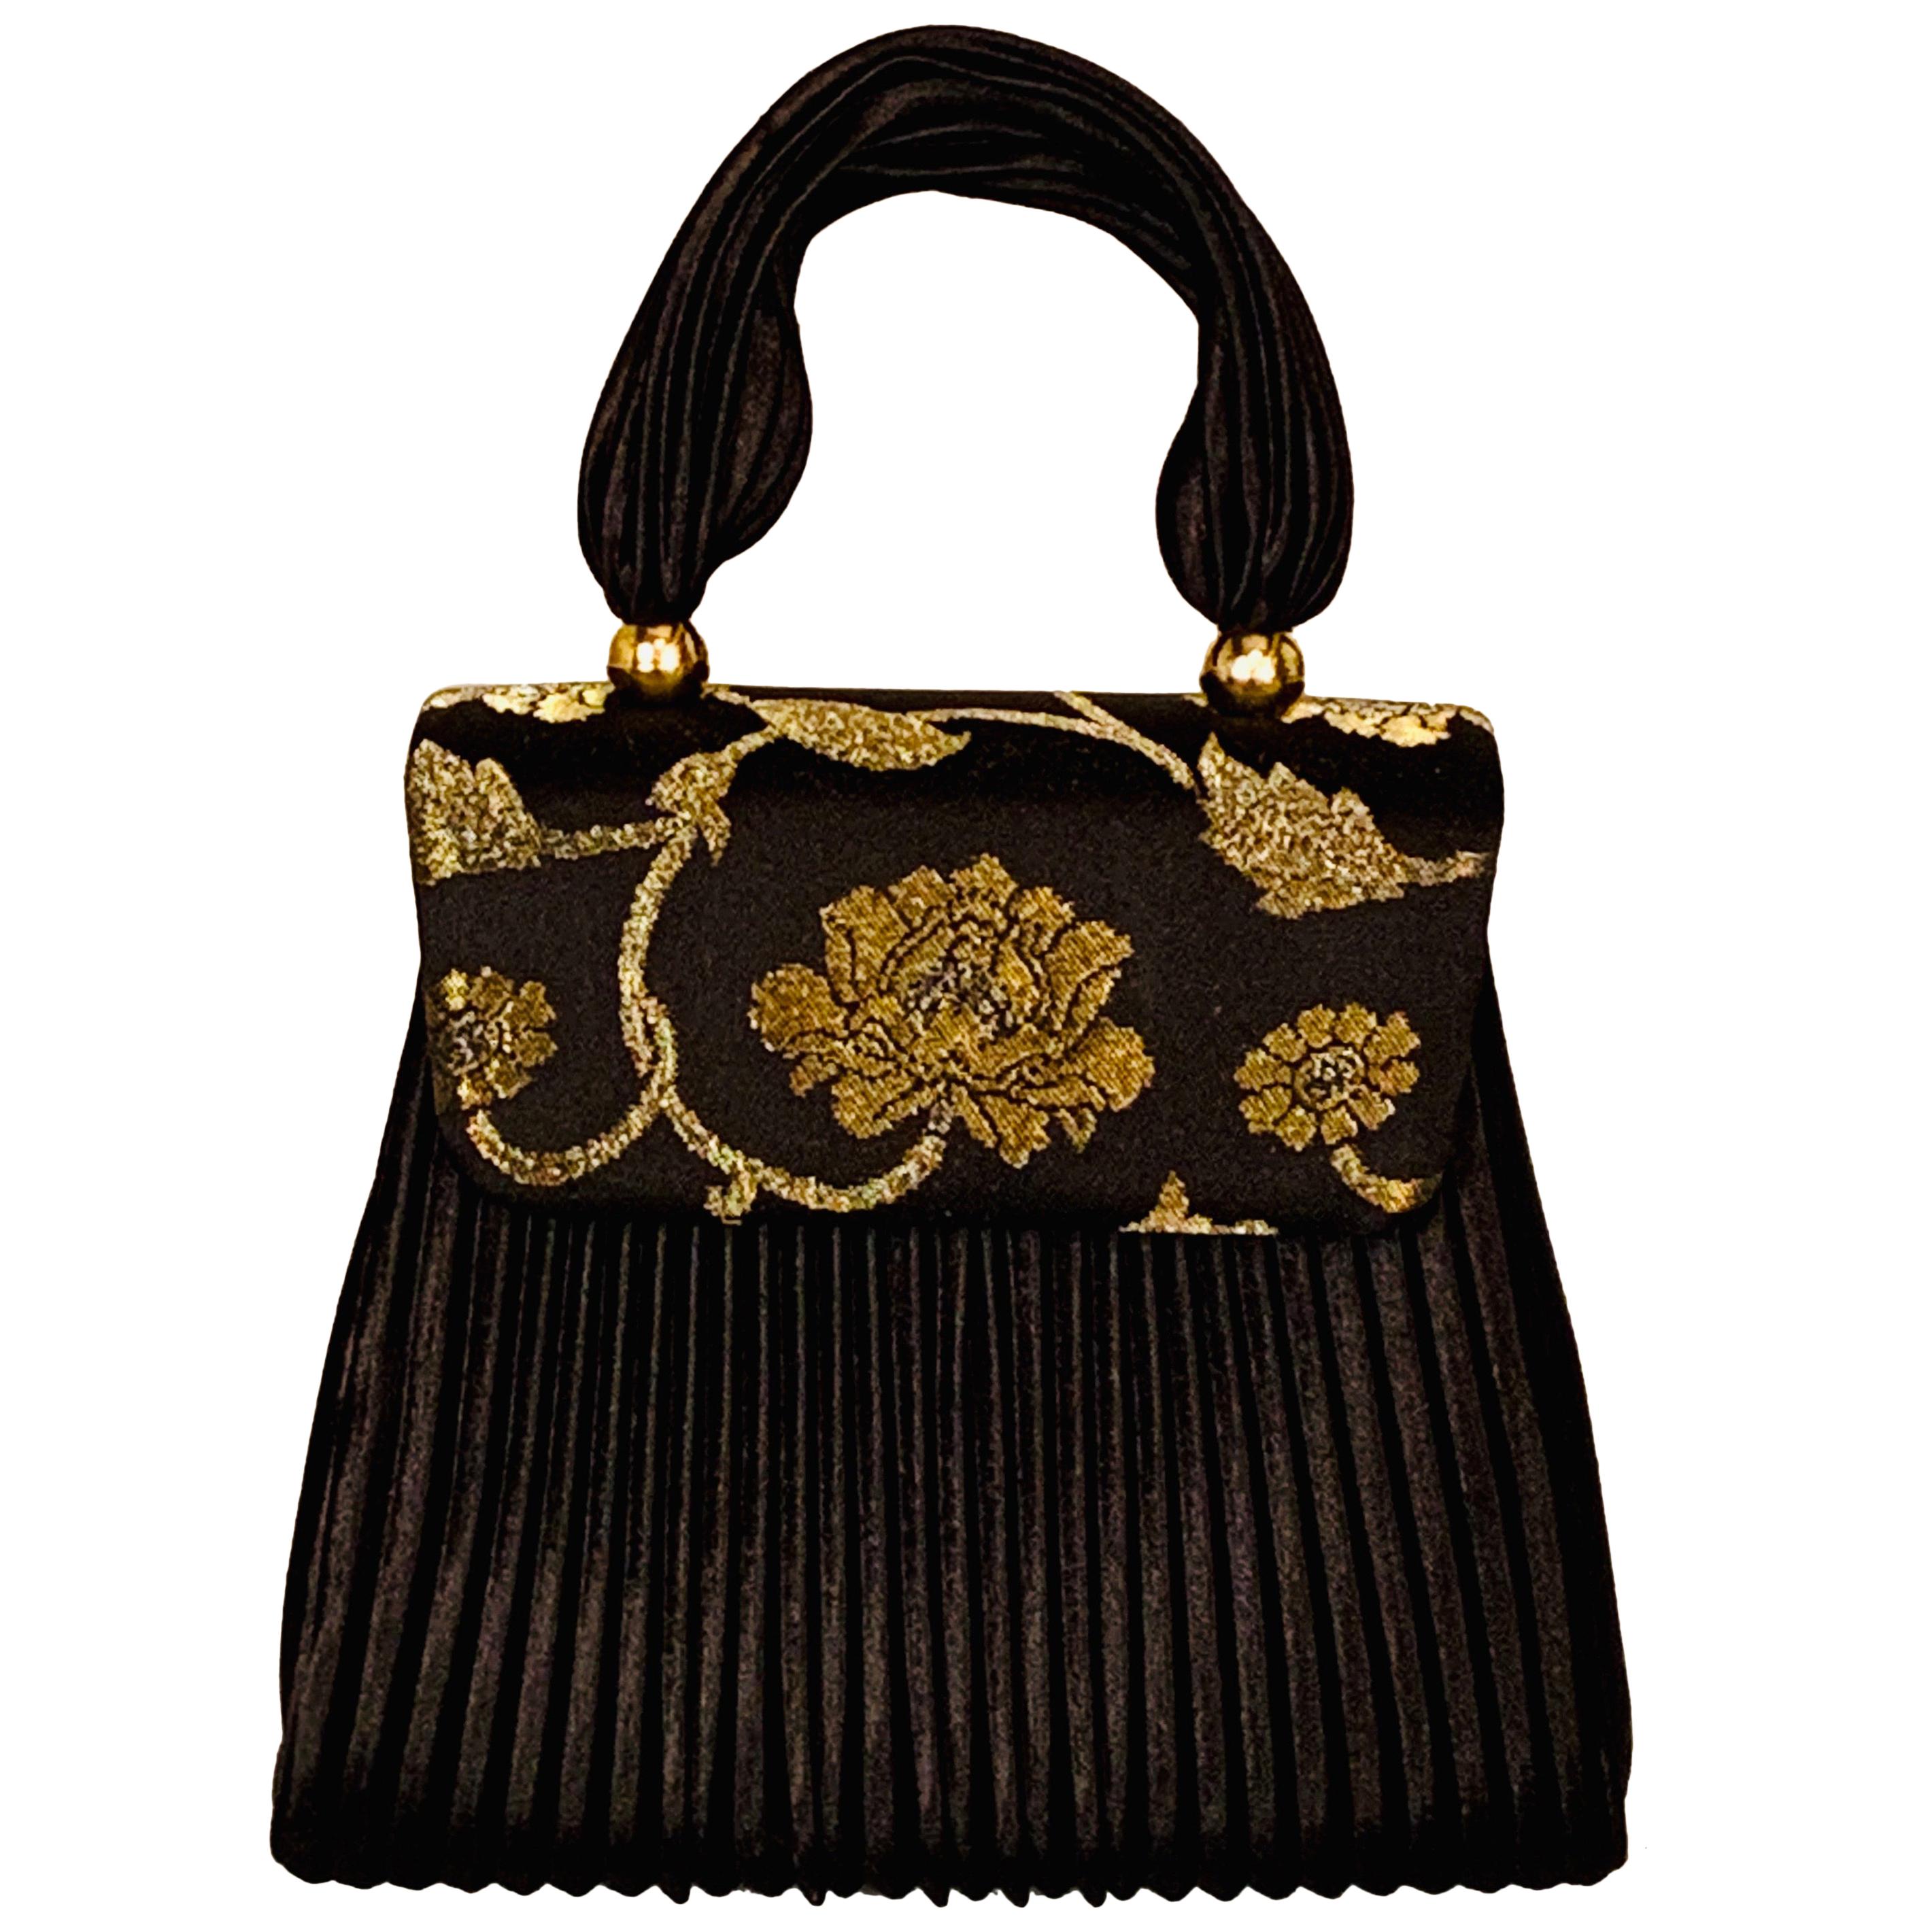 Evening Bag with Black Fortuny Style Pleats and Gold and Silver Brocade Accent